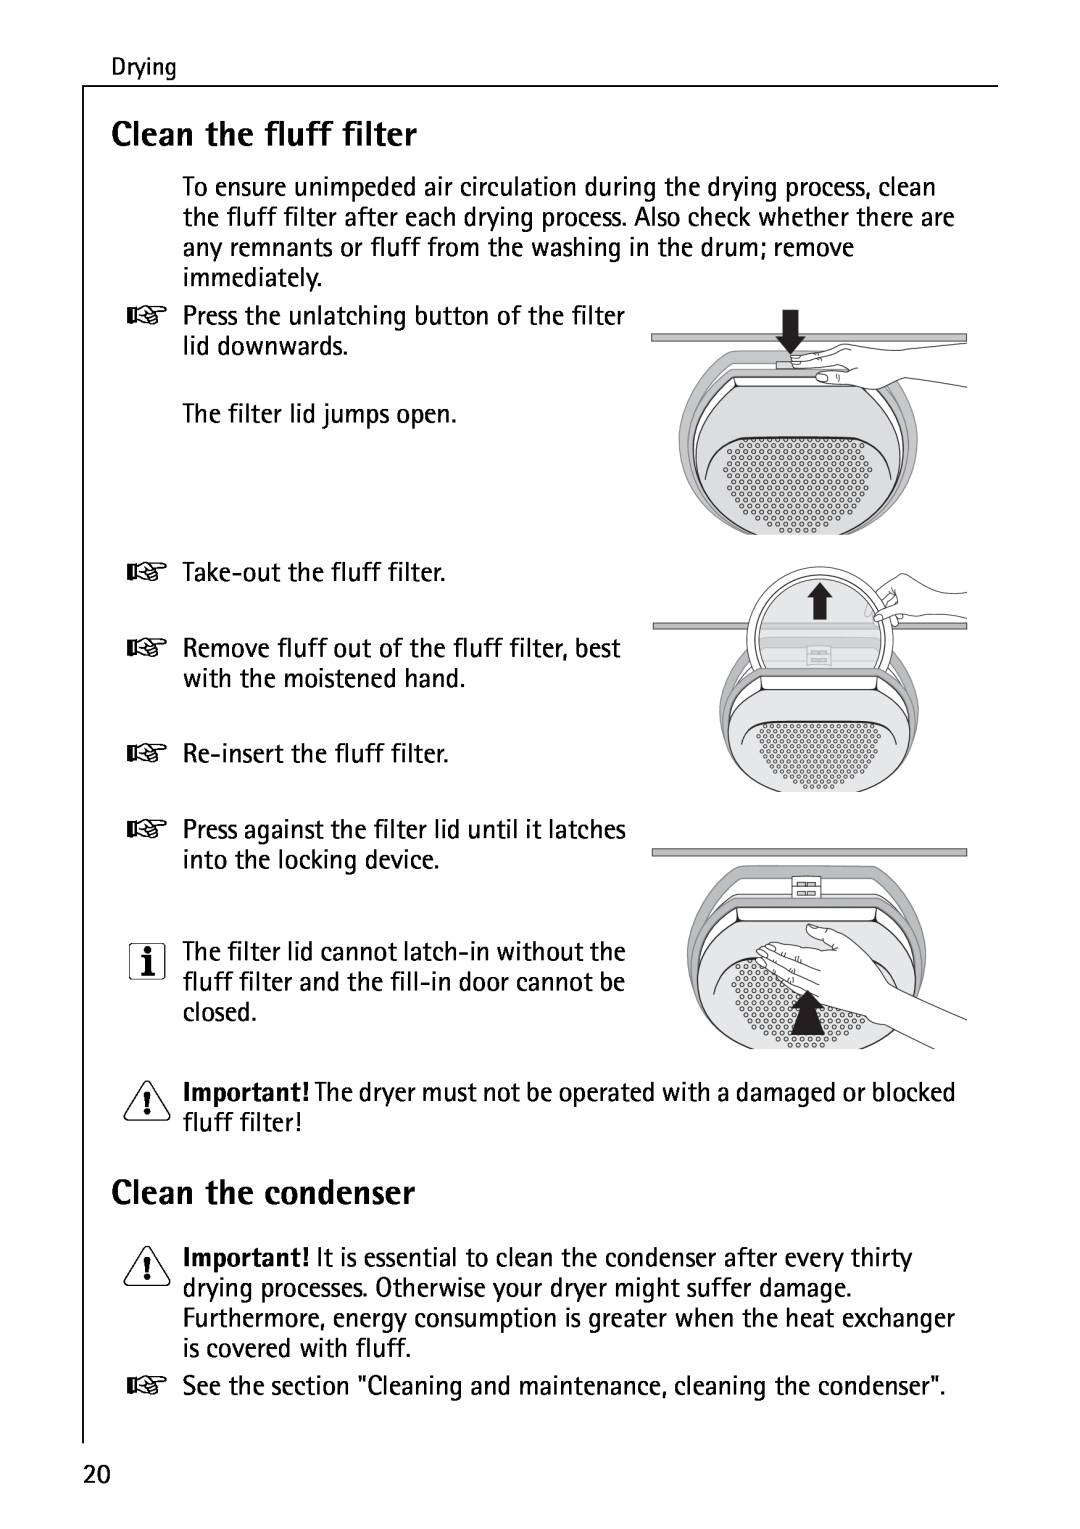 AEG 56609 operating instructions Clean the fluff filter, Clean the condenser 